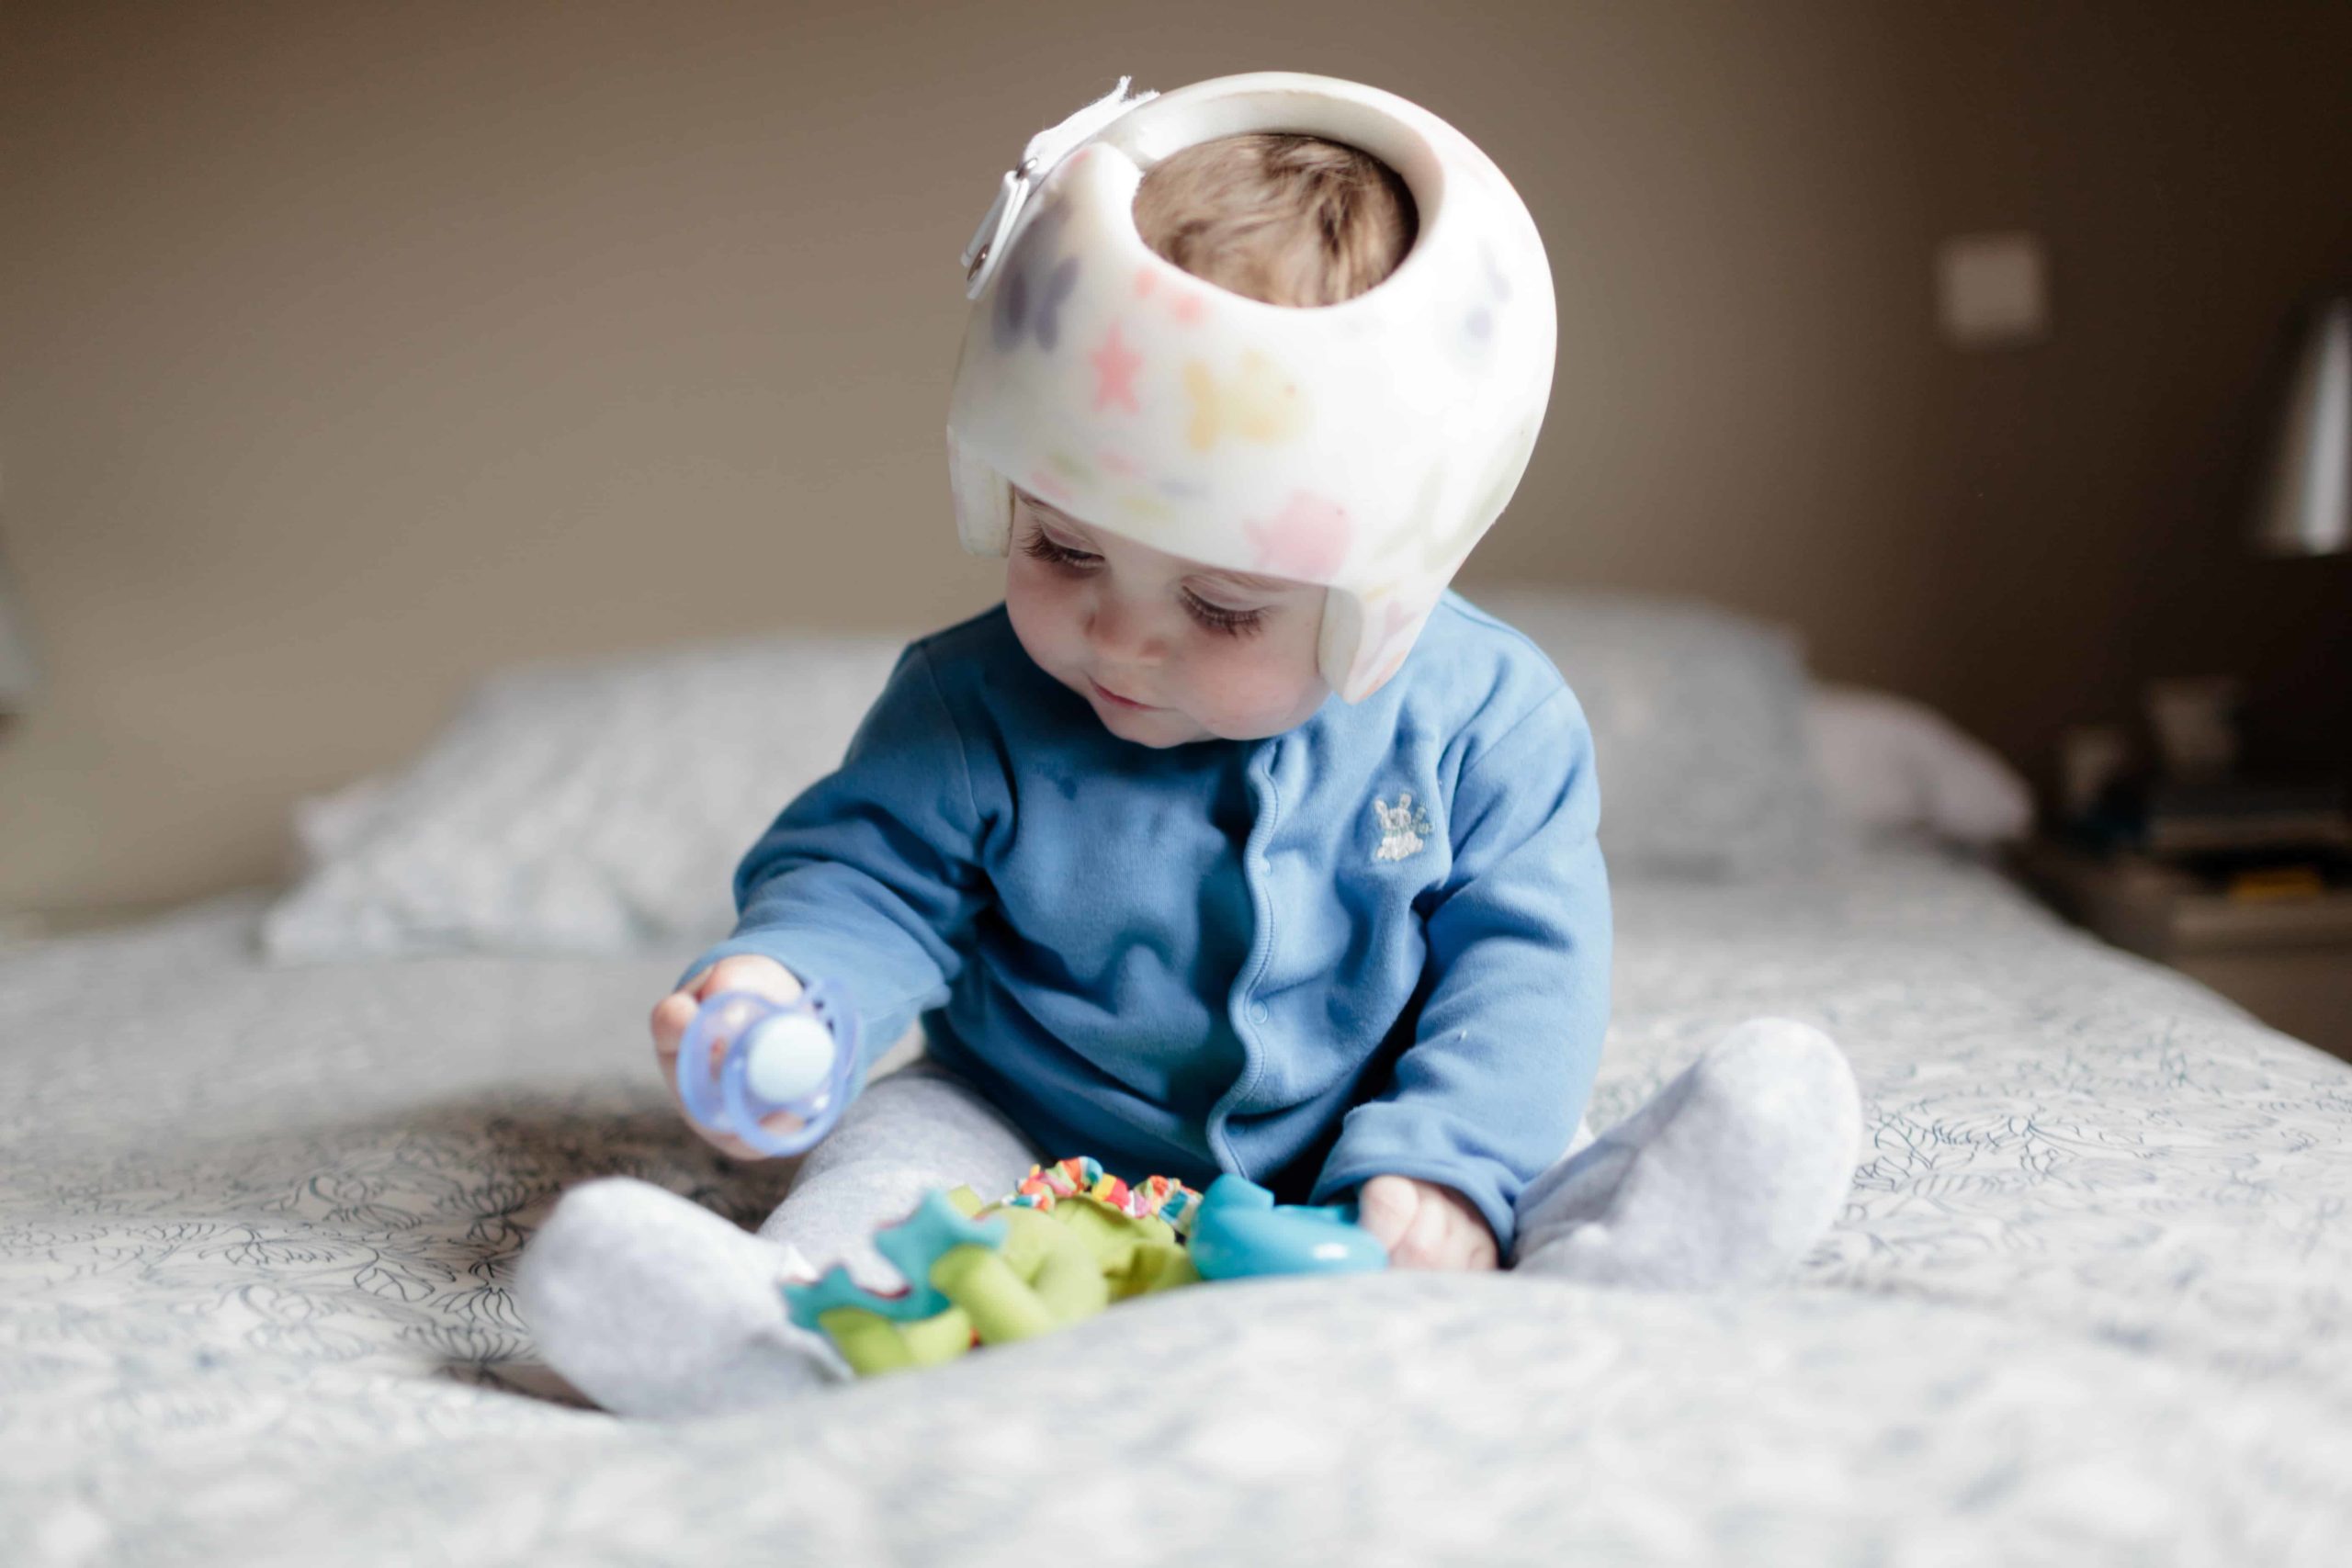 Does your baby need helmet therapy? 5 facts about flat head